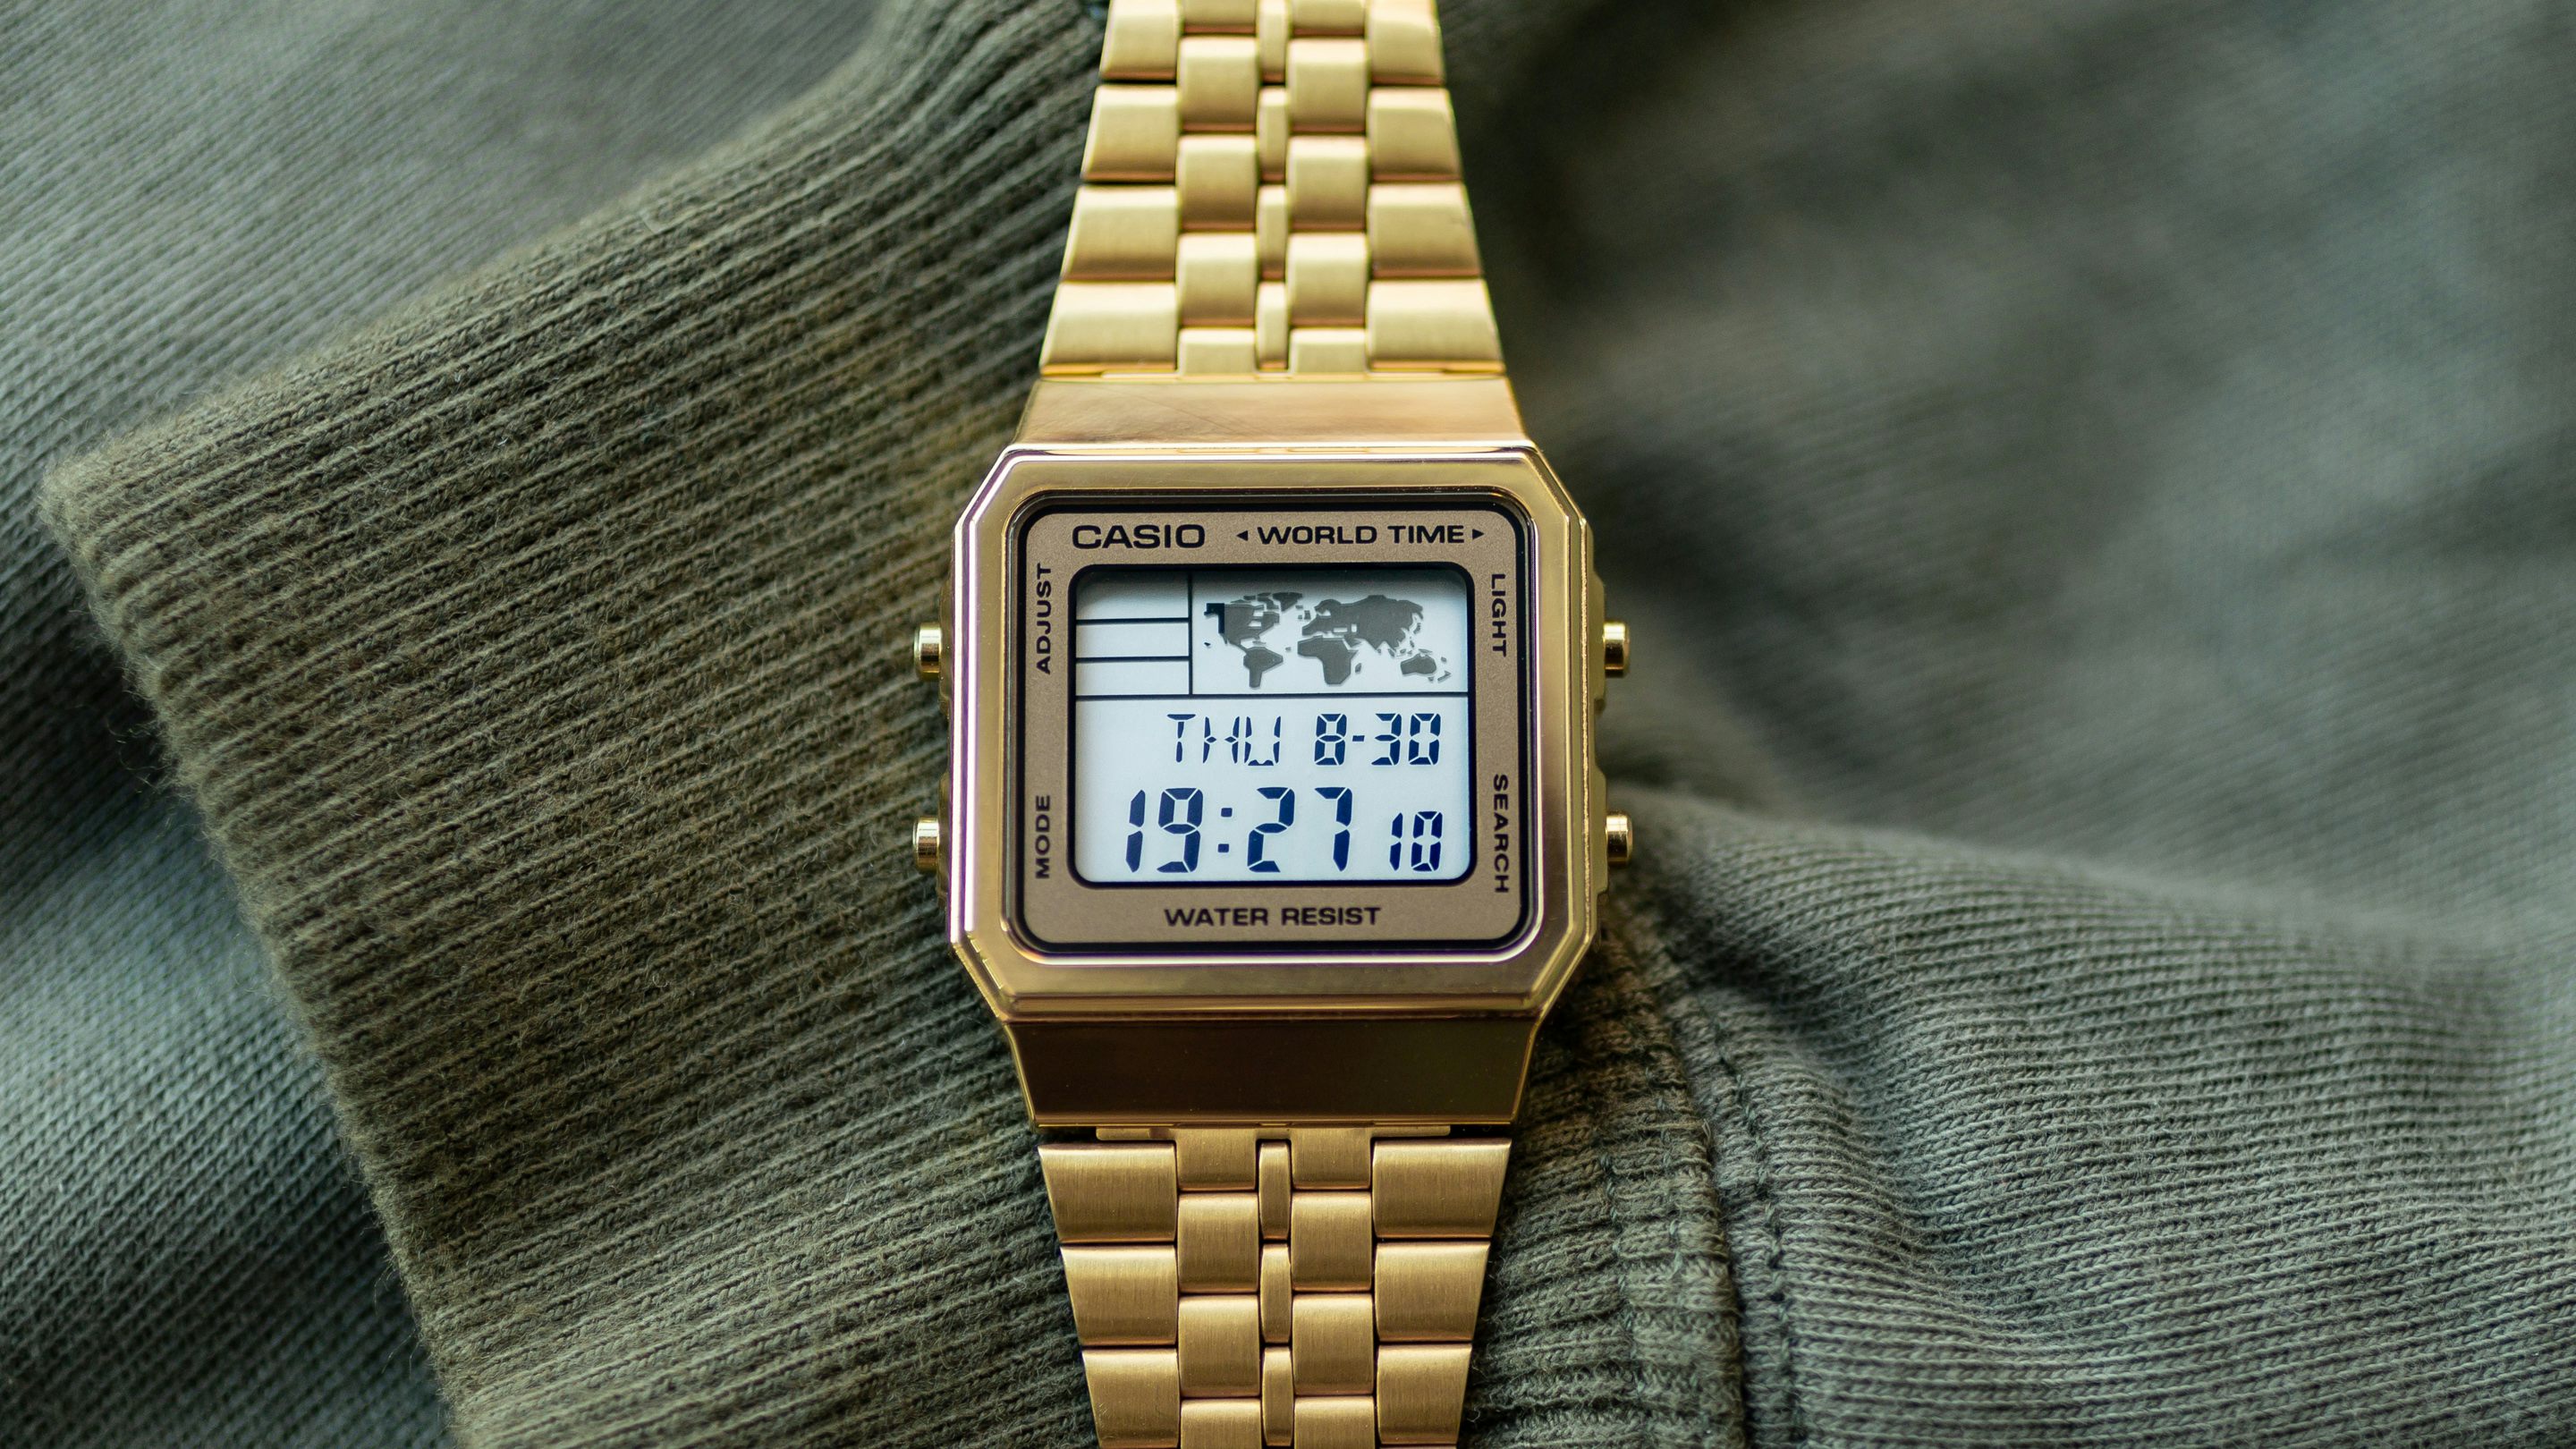 Retrocasio on Instagram: This Casio A700 is the top best seller